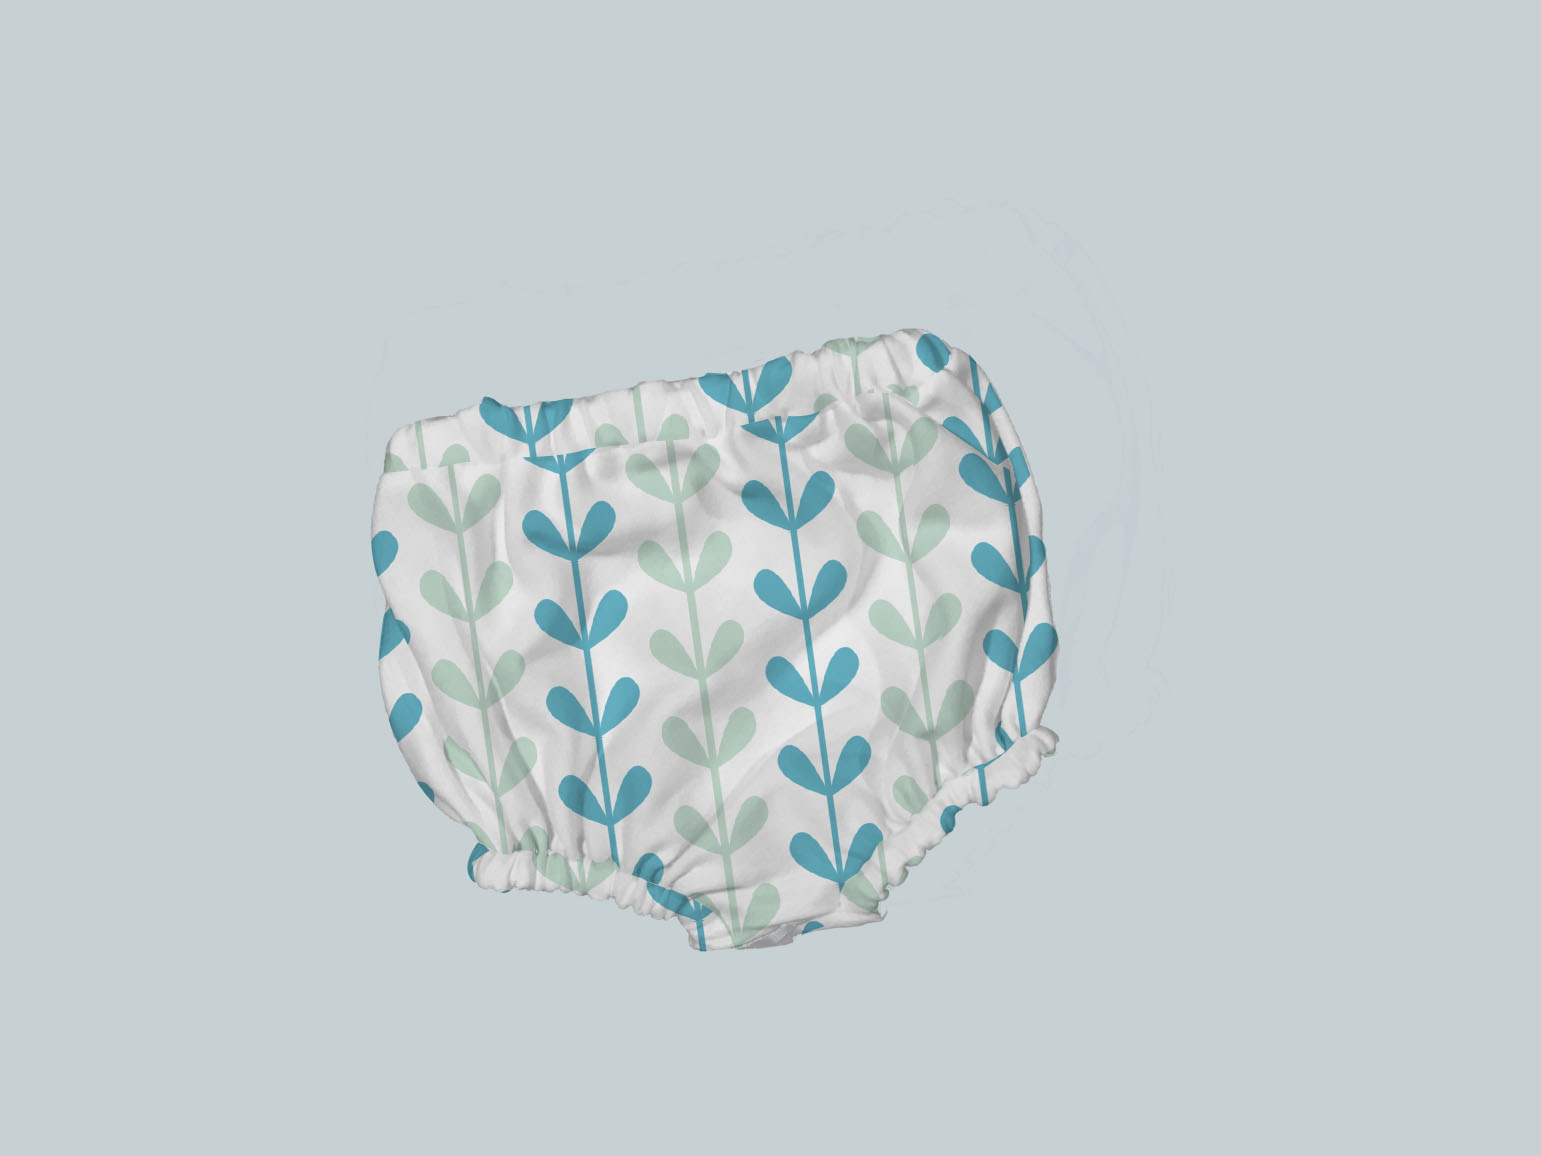 Bummies/Diaper Cover - Leaves in Line